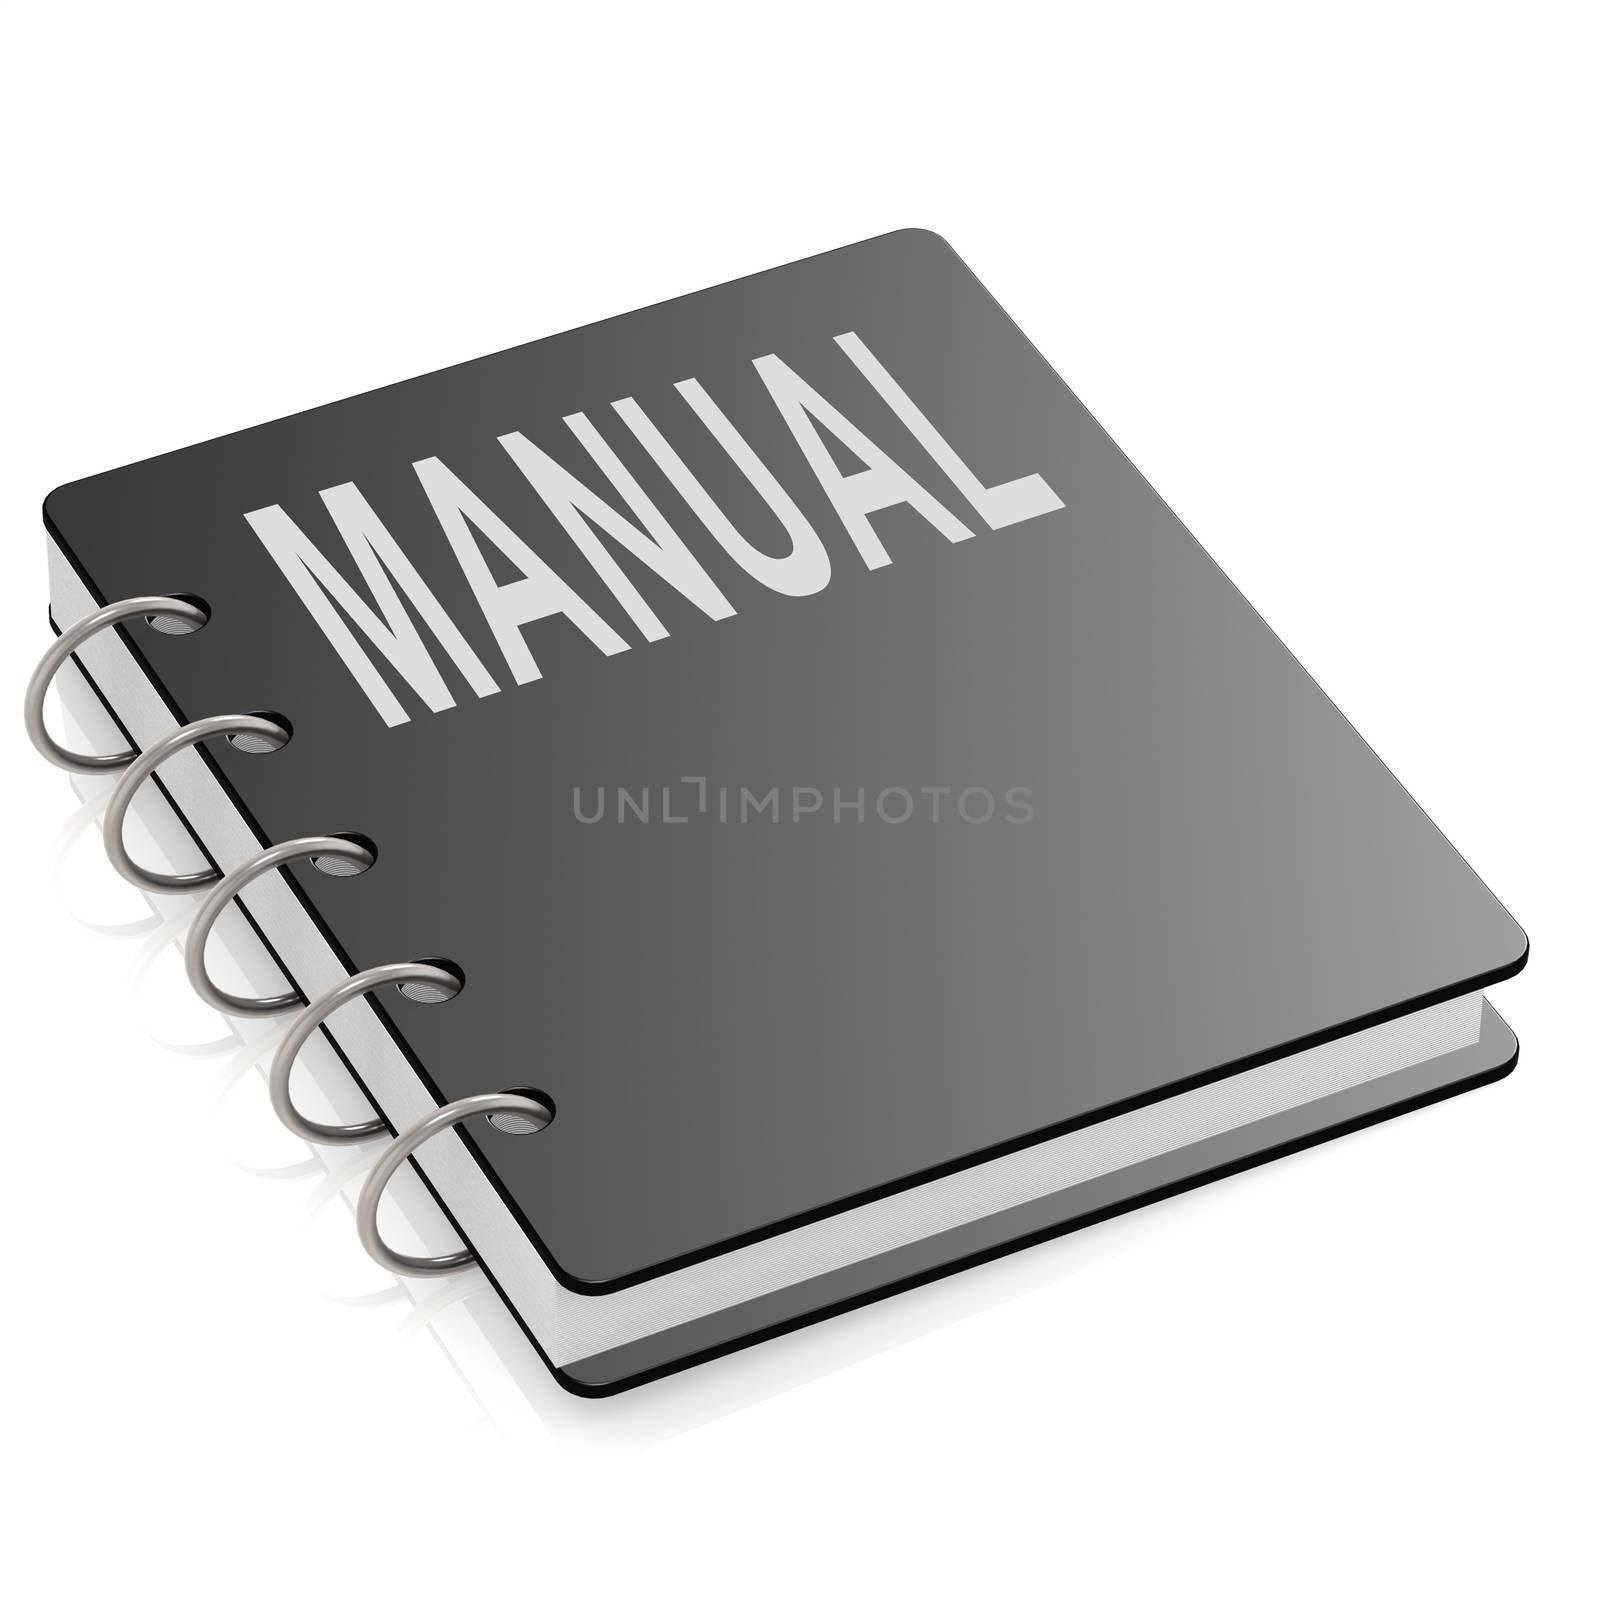 Manual with hard cover book by tang90246